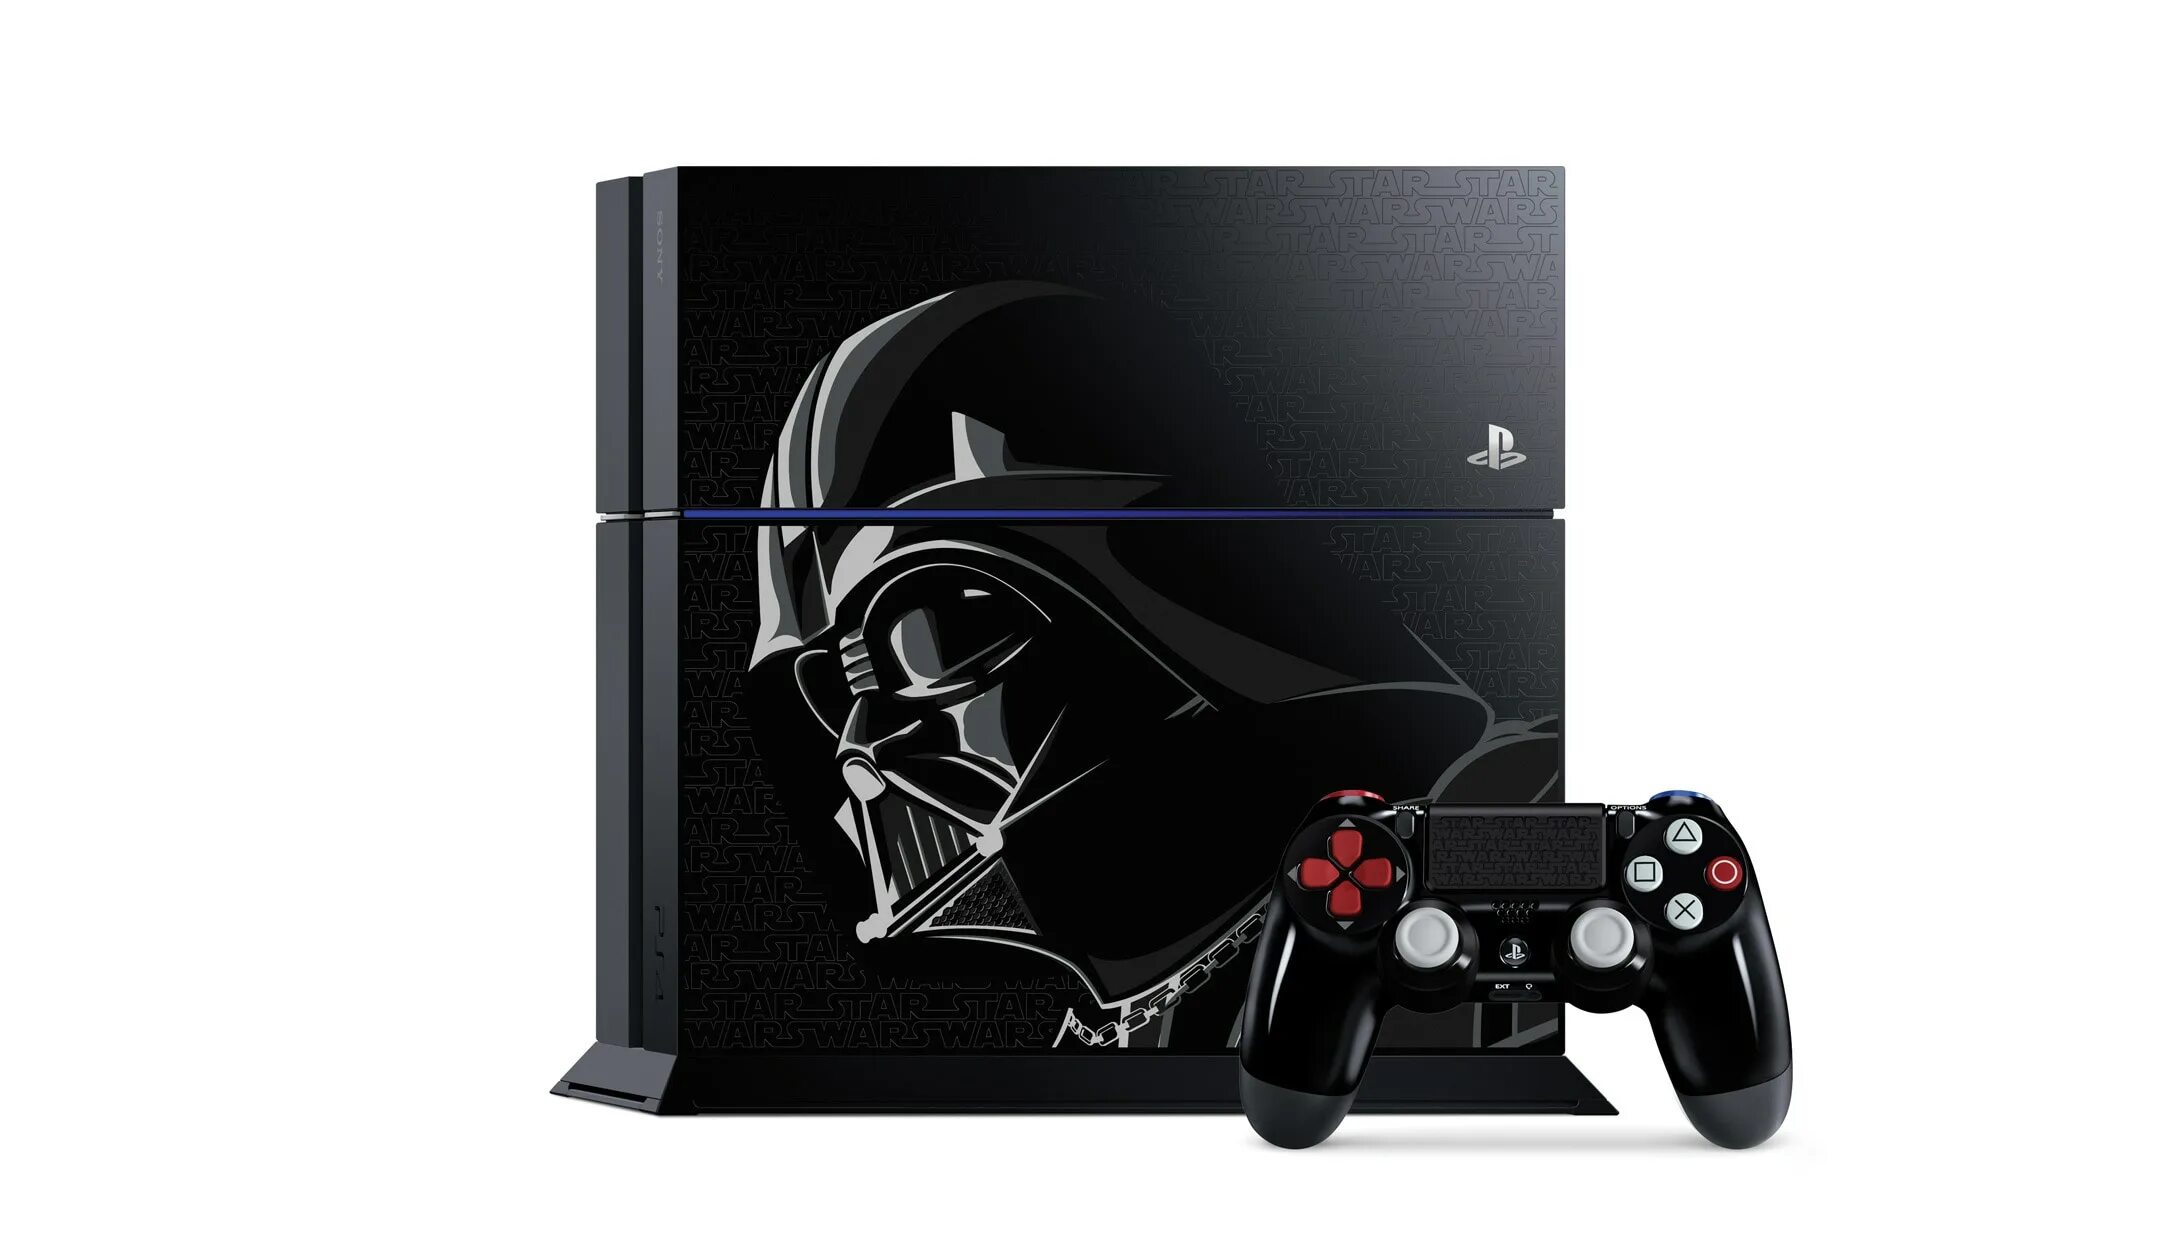 Ps4 project. PLAYSTATION 4 1tb Star Wars Limited Edition. Sony PLAYSTATION 4 Pro Star Wars. Sony ps4 Star Wars Console. Ps4 Darth Vader Edition.